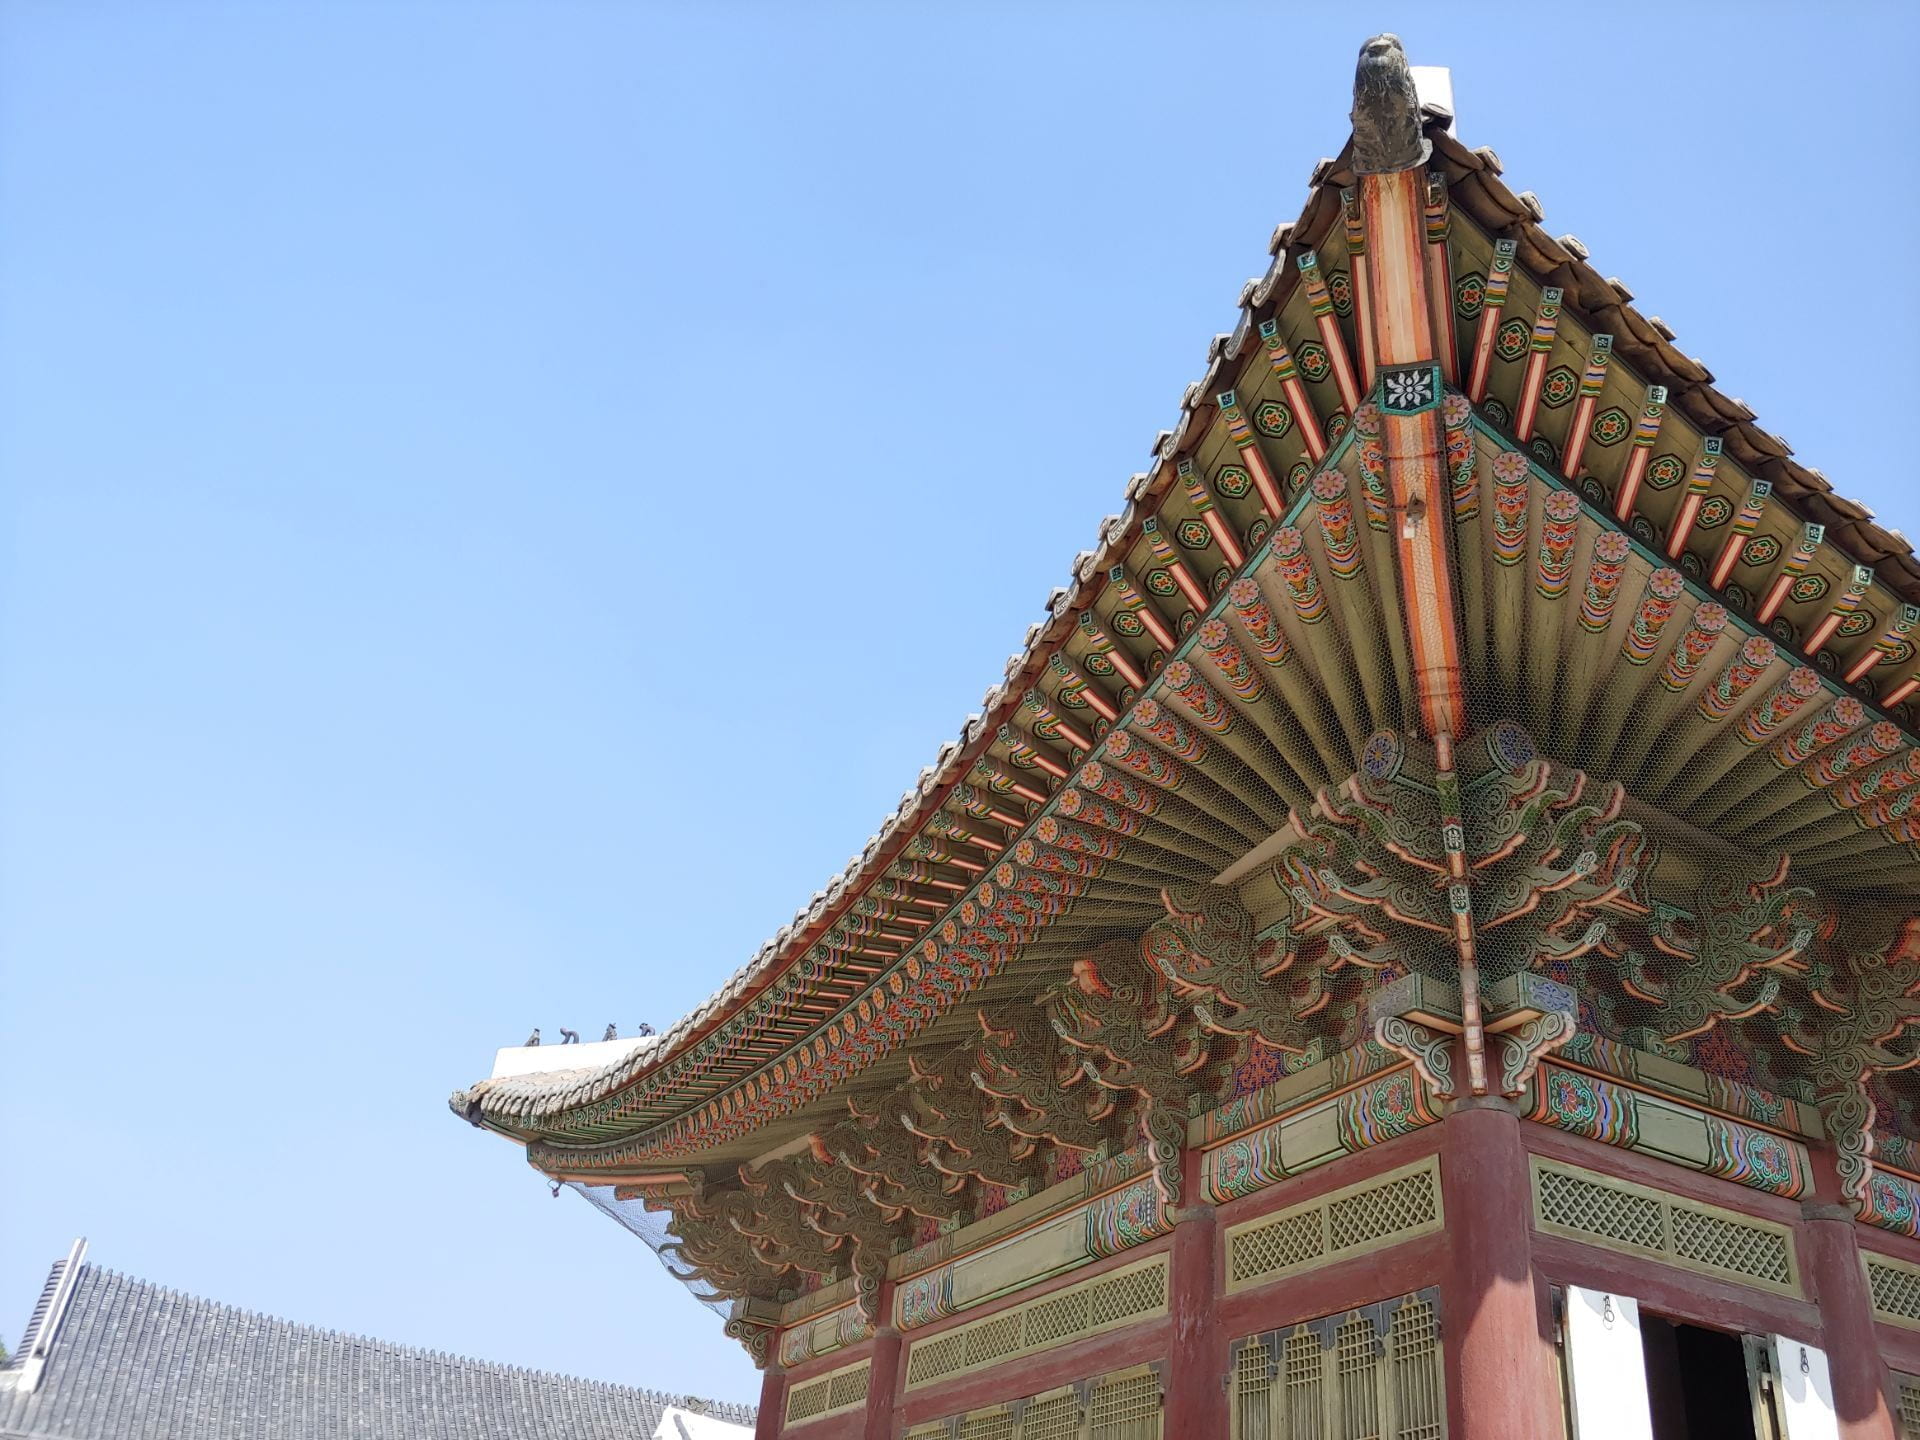 The corner of a Korean Palace roof and a blue sky.